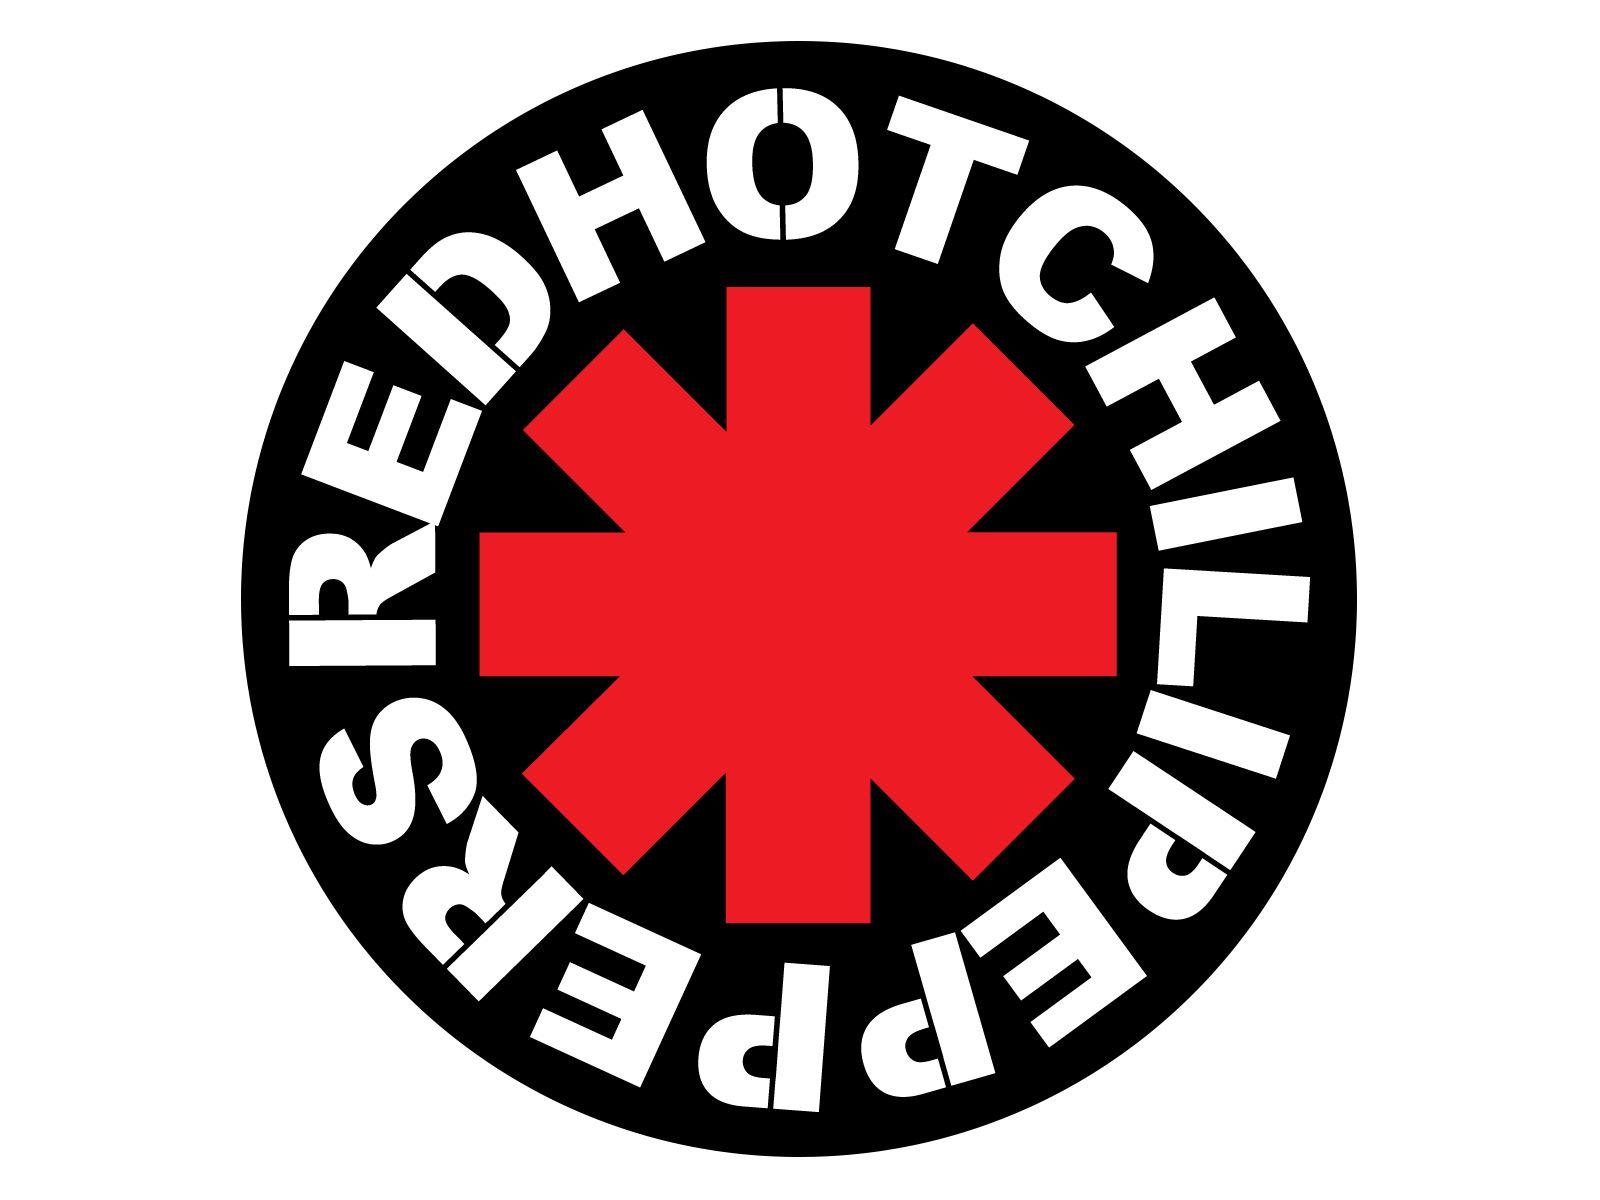 red hot chili peppers logo vector